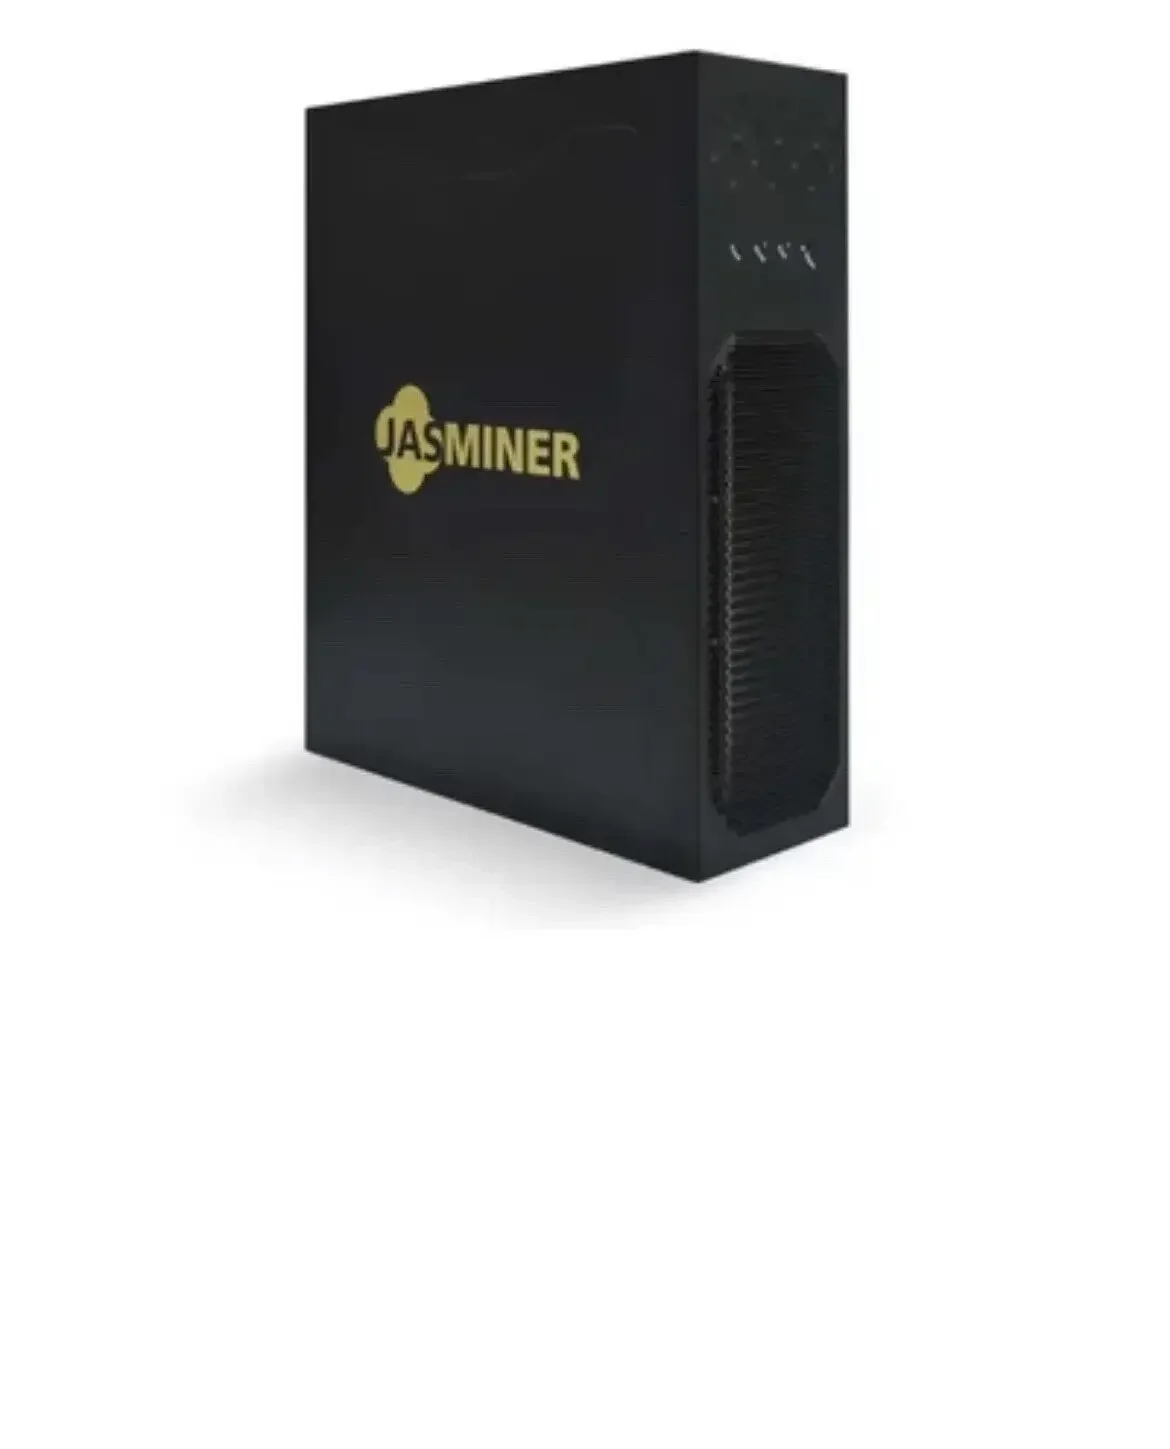 

Summer discount of 50% New Jasminer X4-Q ETC ETHW Miner 1040MH/s 370w with PSU Ipollo